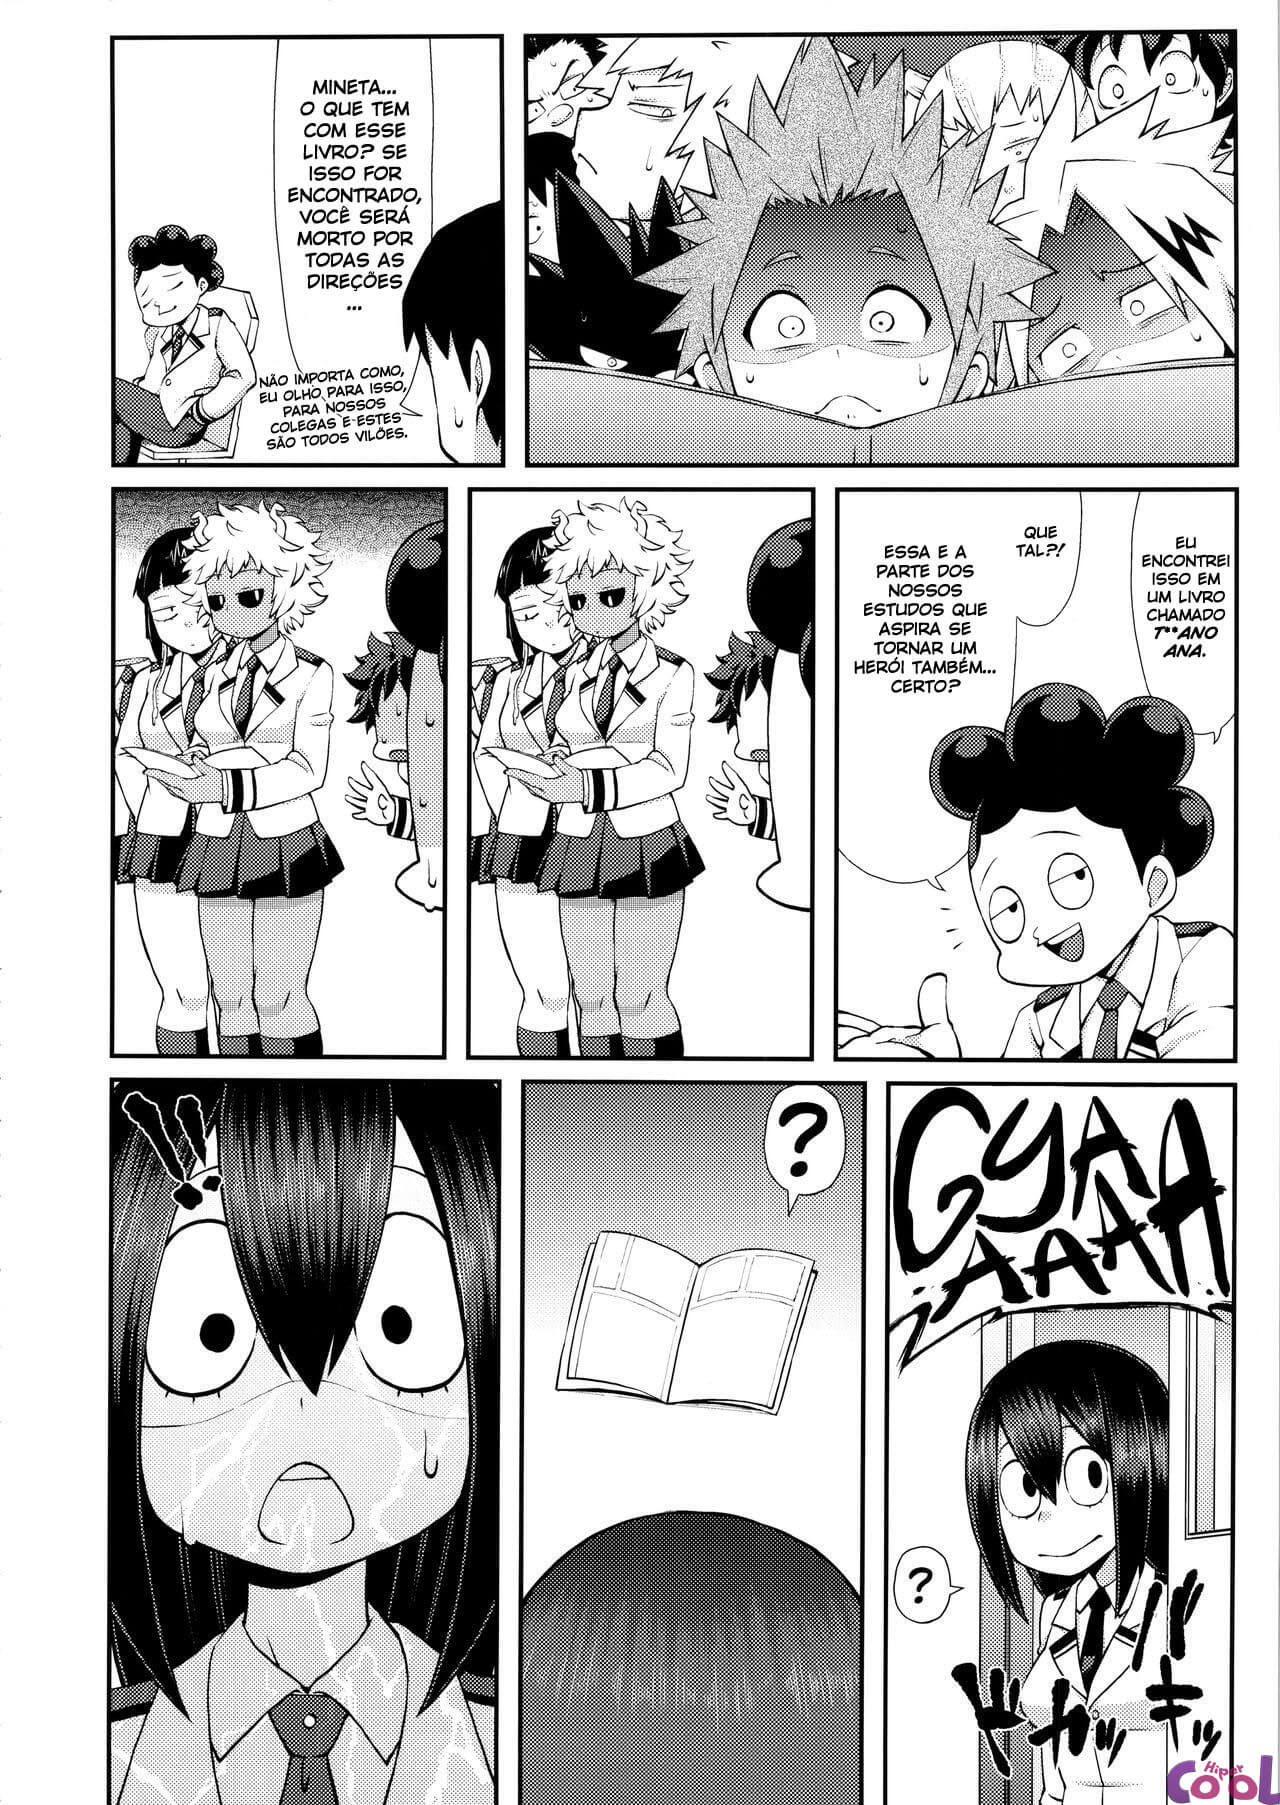 froppy-chapter-01-page-34.jpg